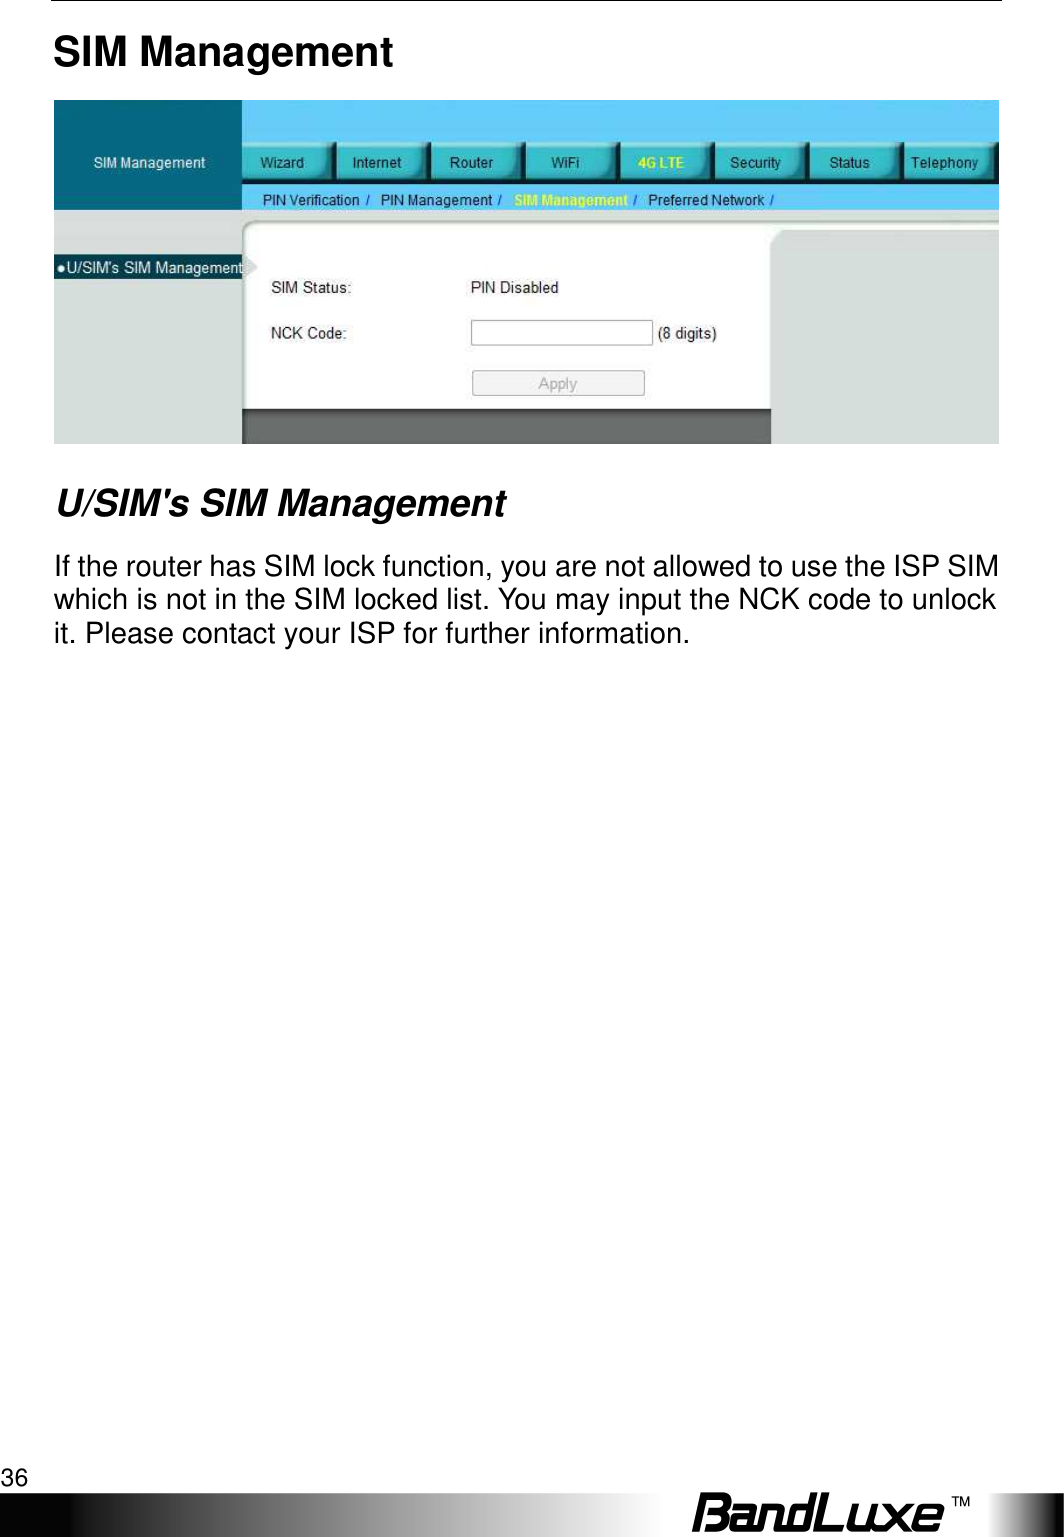 4G LTE Setup 36  SIM Management  U/SIM&apos;s SIM Management   If the router has SIM lock function, you are not allowed to use the ISP SIM which is not in the SIM locked list. You may input the NCK code to unlock it. Please contact your ISP for further information.    